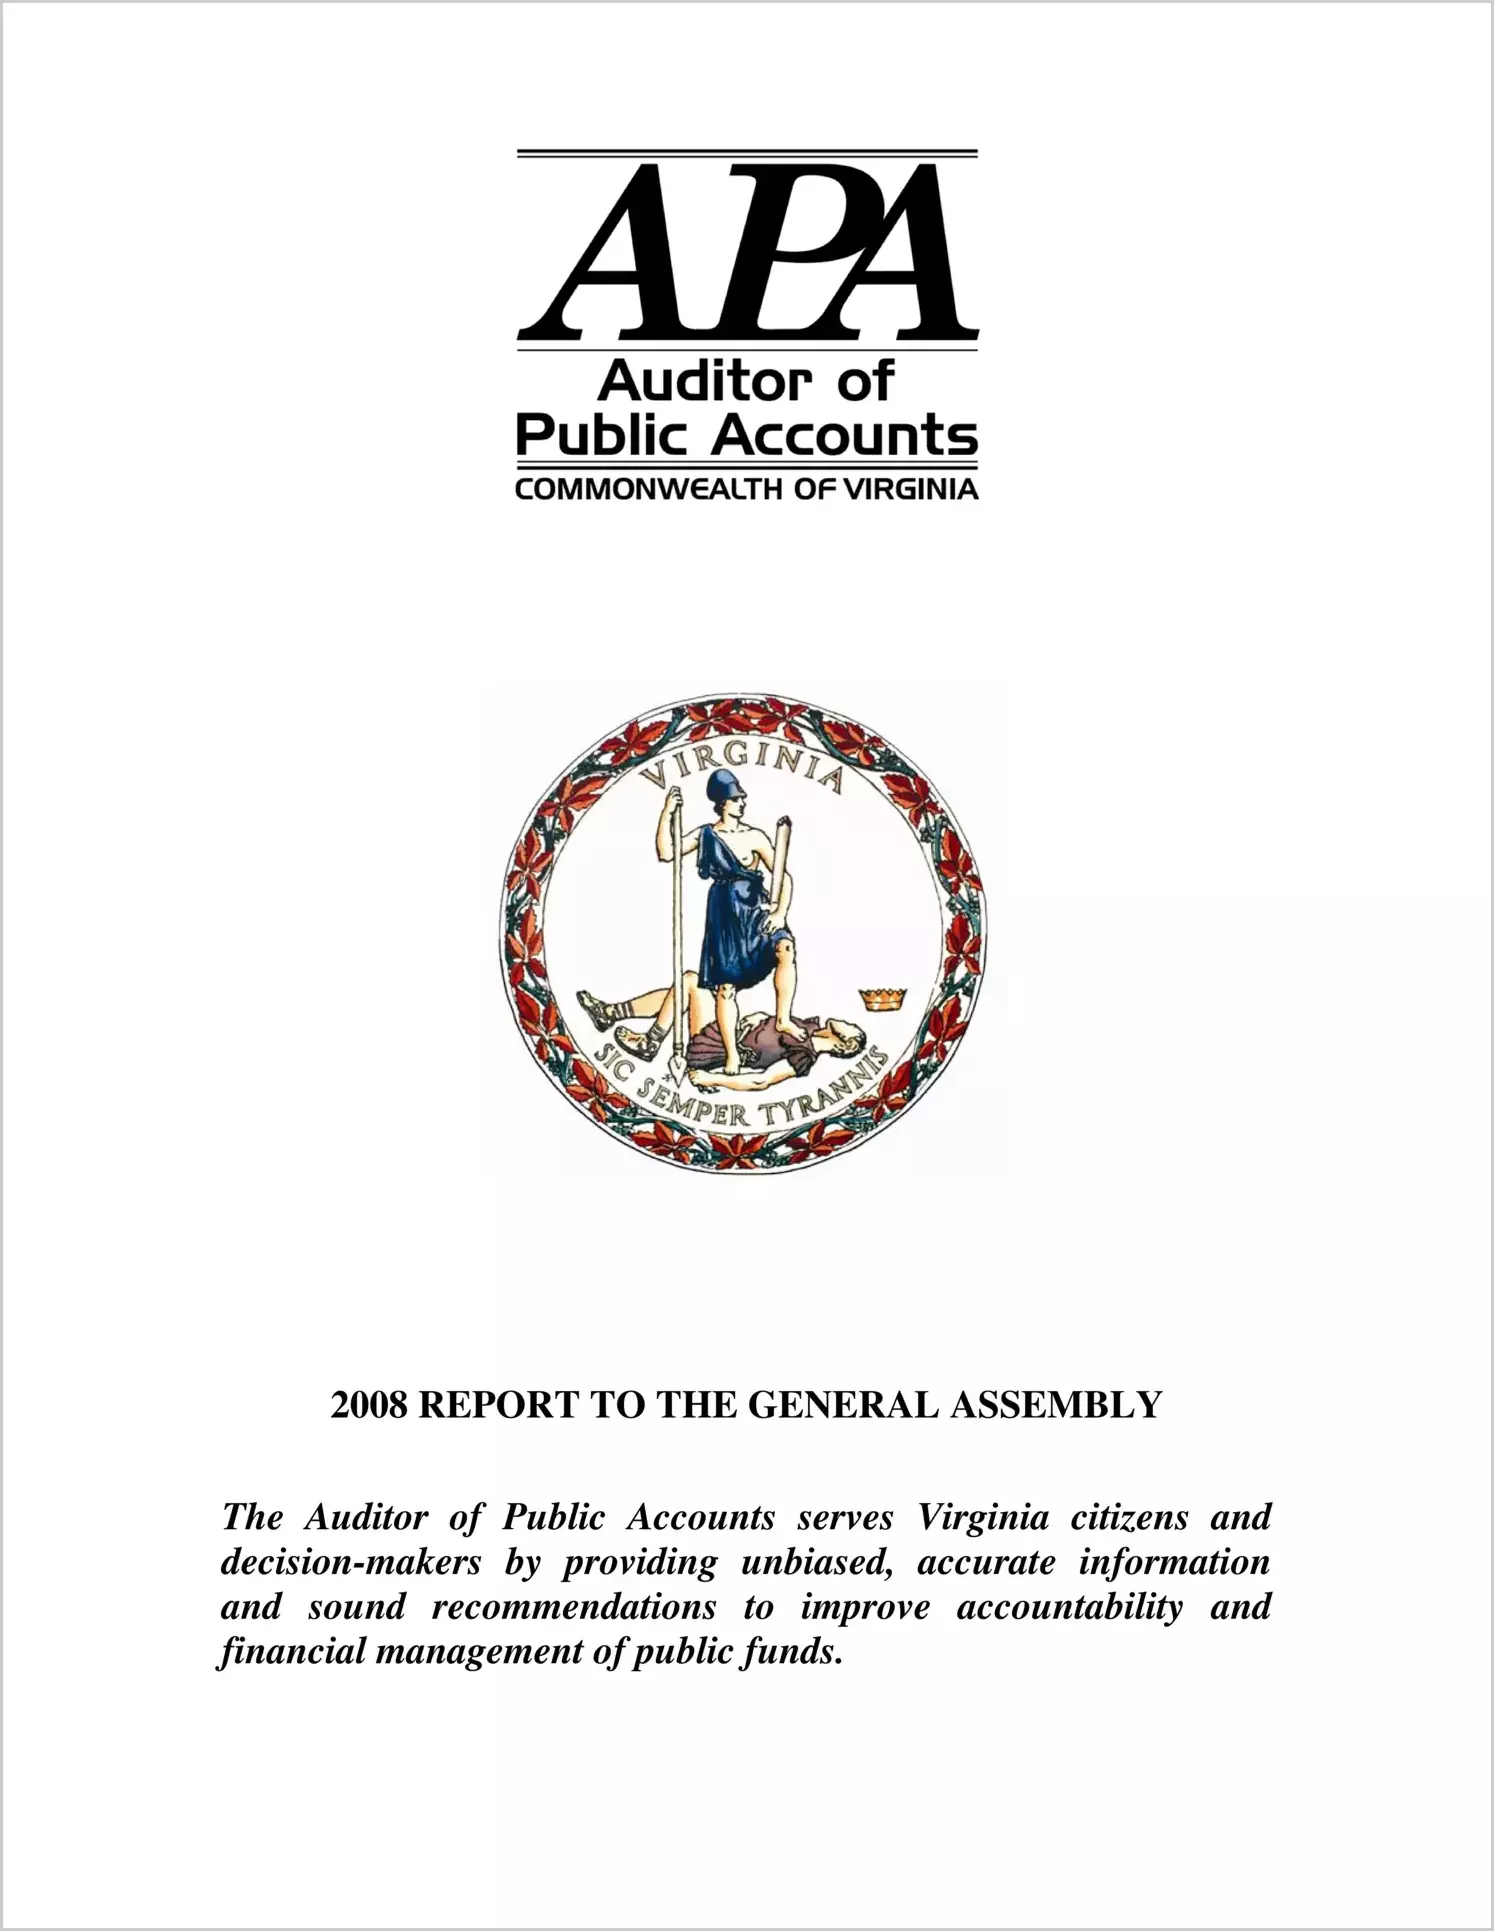 Auditor of Public Accounts Annual Report to the General Assembly for 2008